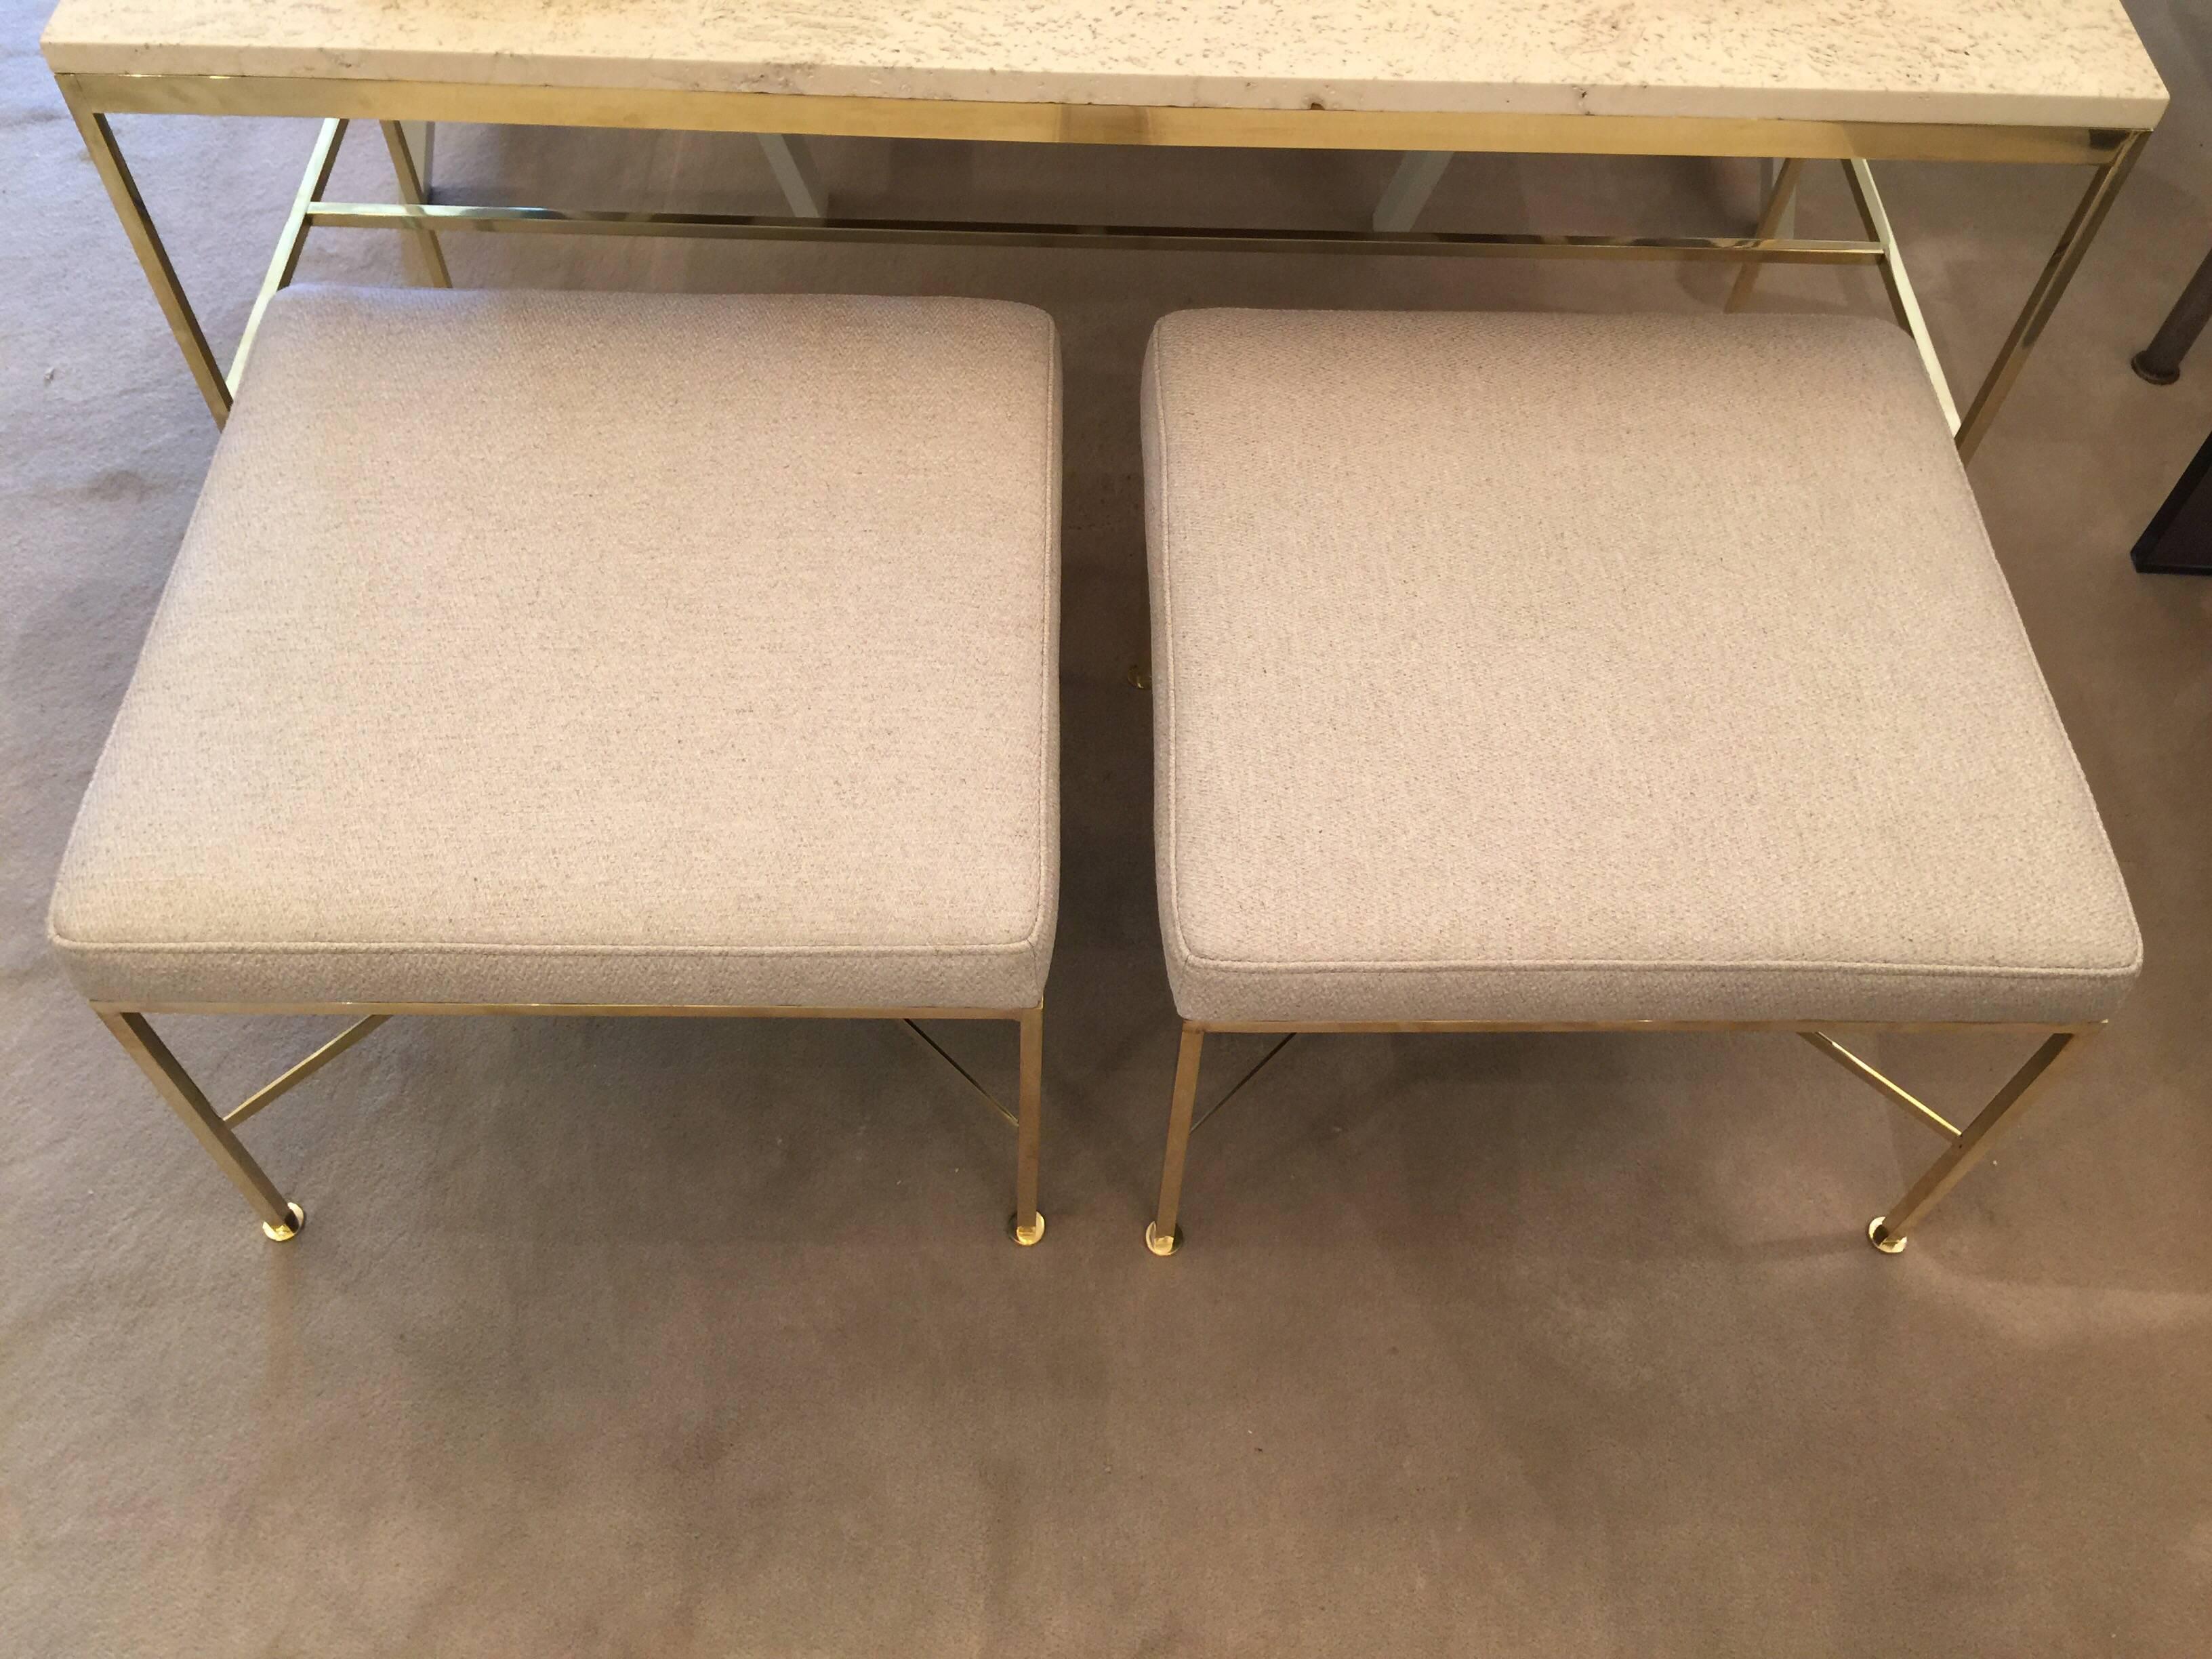 These X-base design brass stools by Paul McCobb for Calvin Furniture are truly classic and perfect for any space.
Newly upholstered seats by Gustavo Olivieri Antiques, original patina is very nice.

 